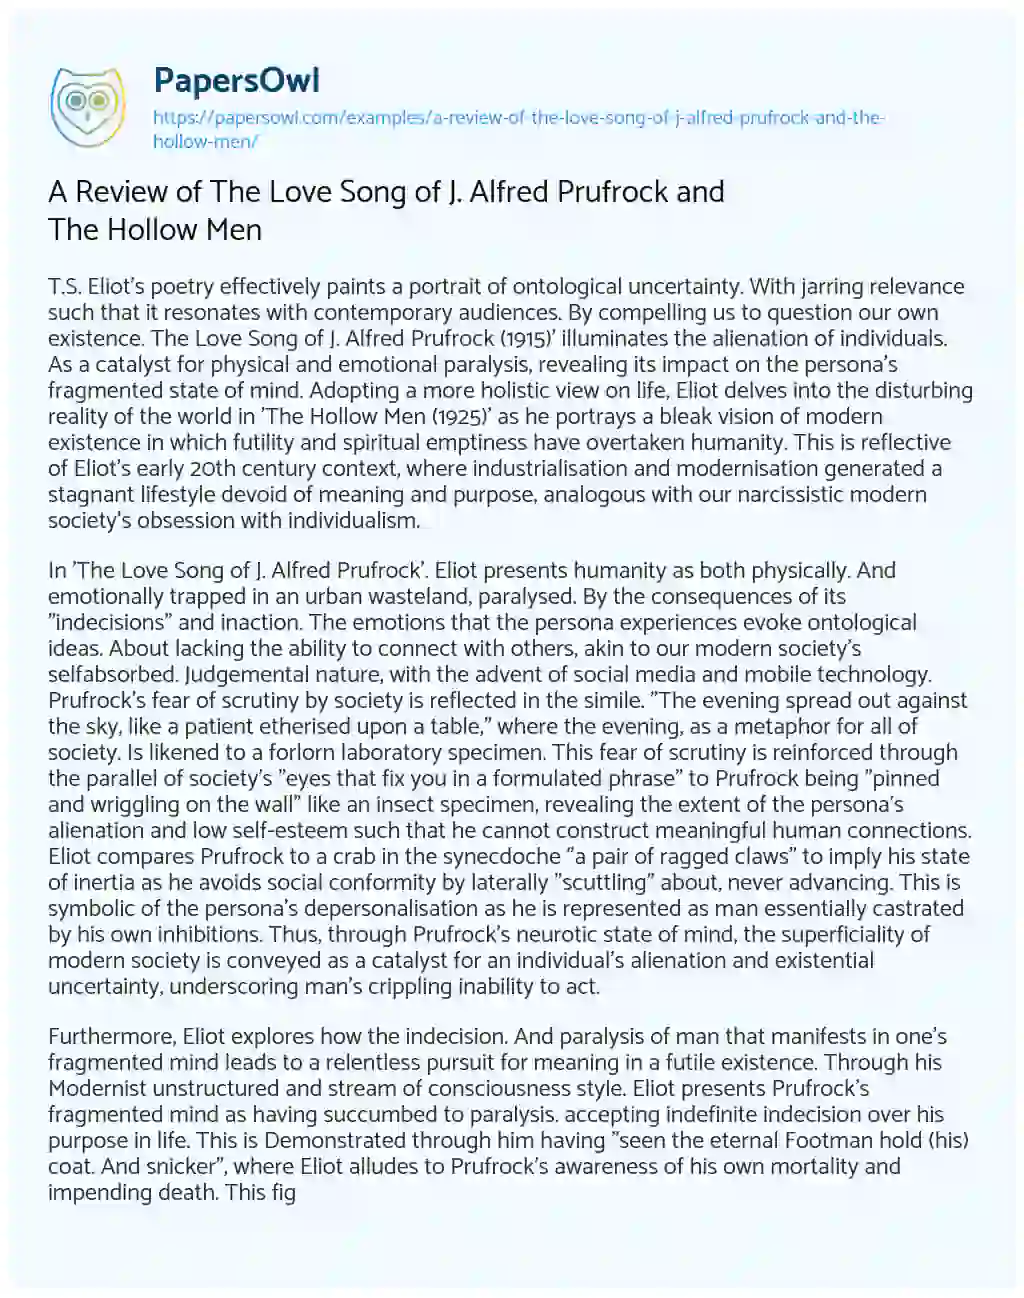 Essay on A Review of the Love Song of J. Alfred Prufrock and the Hollow Men